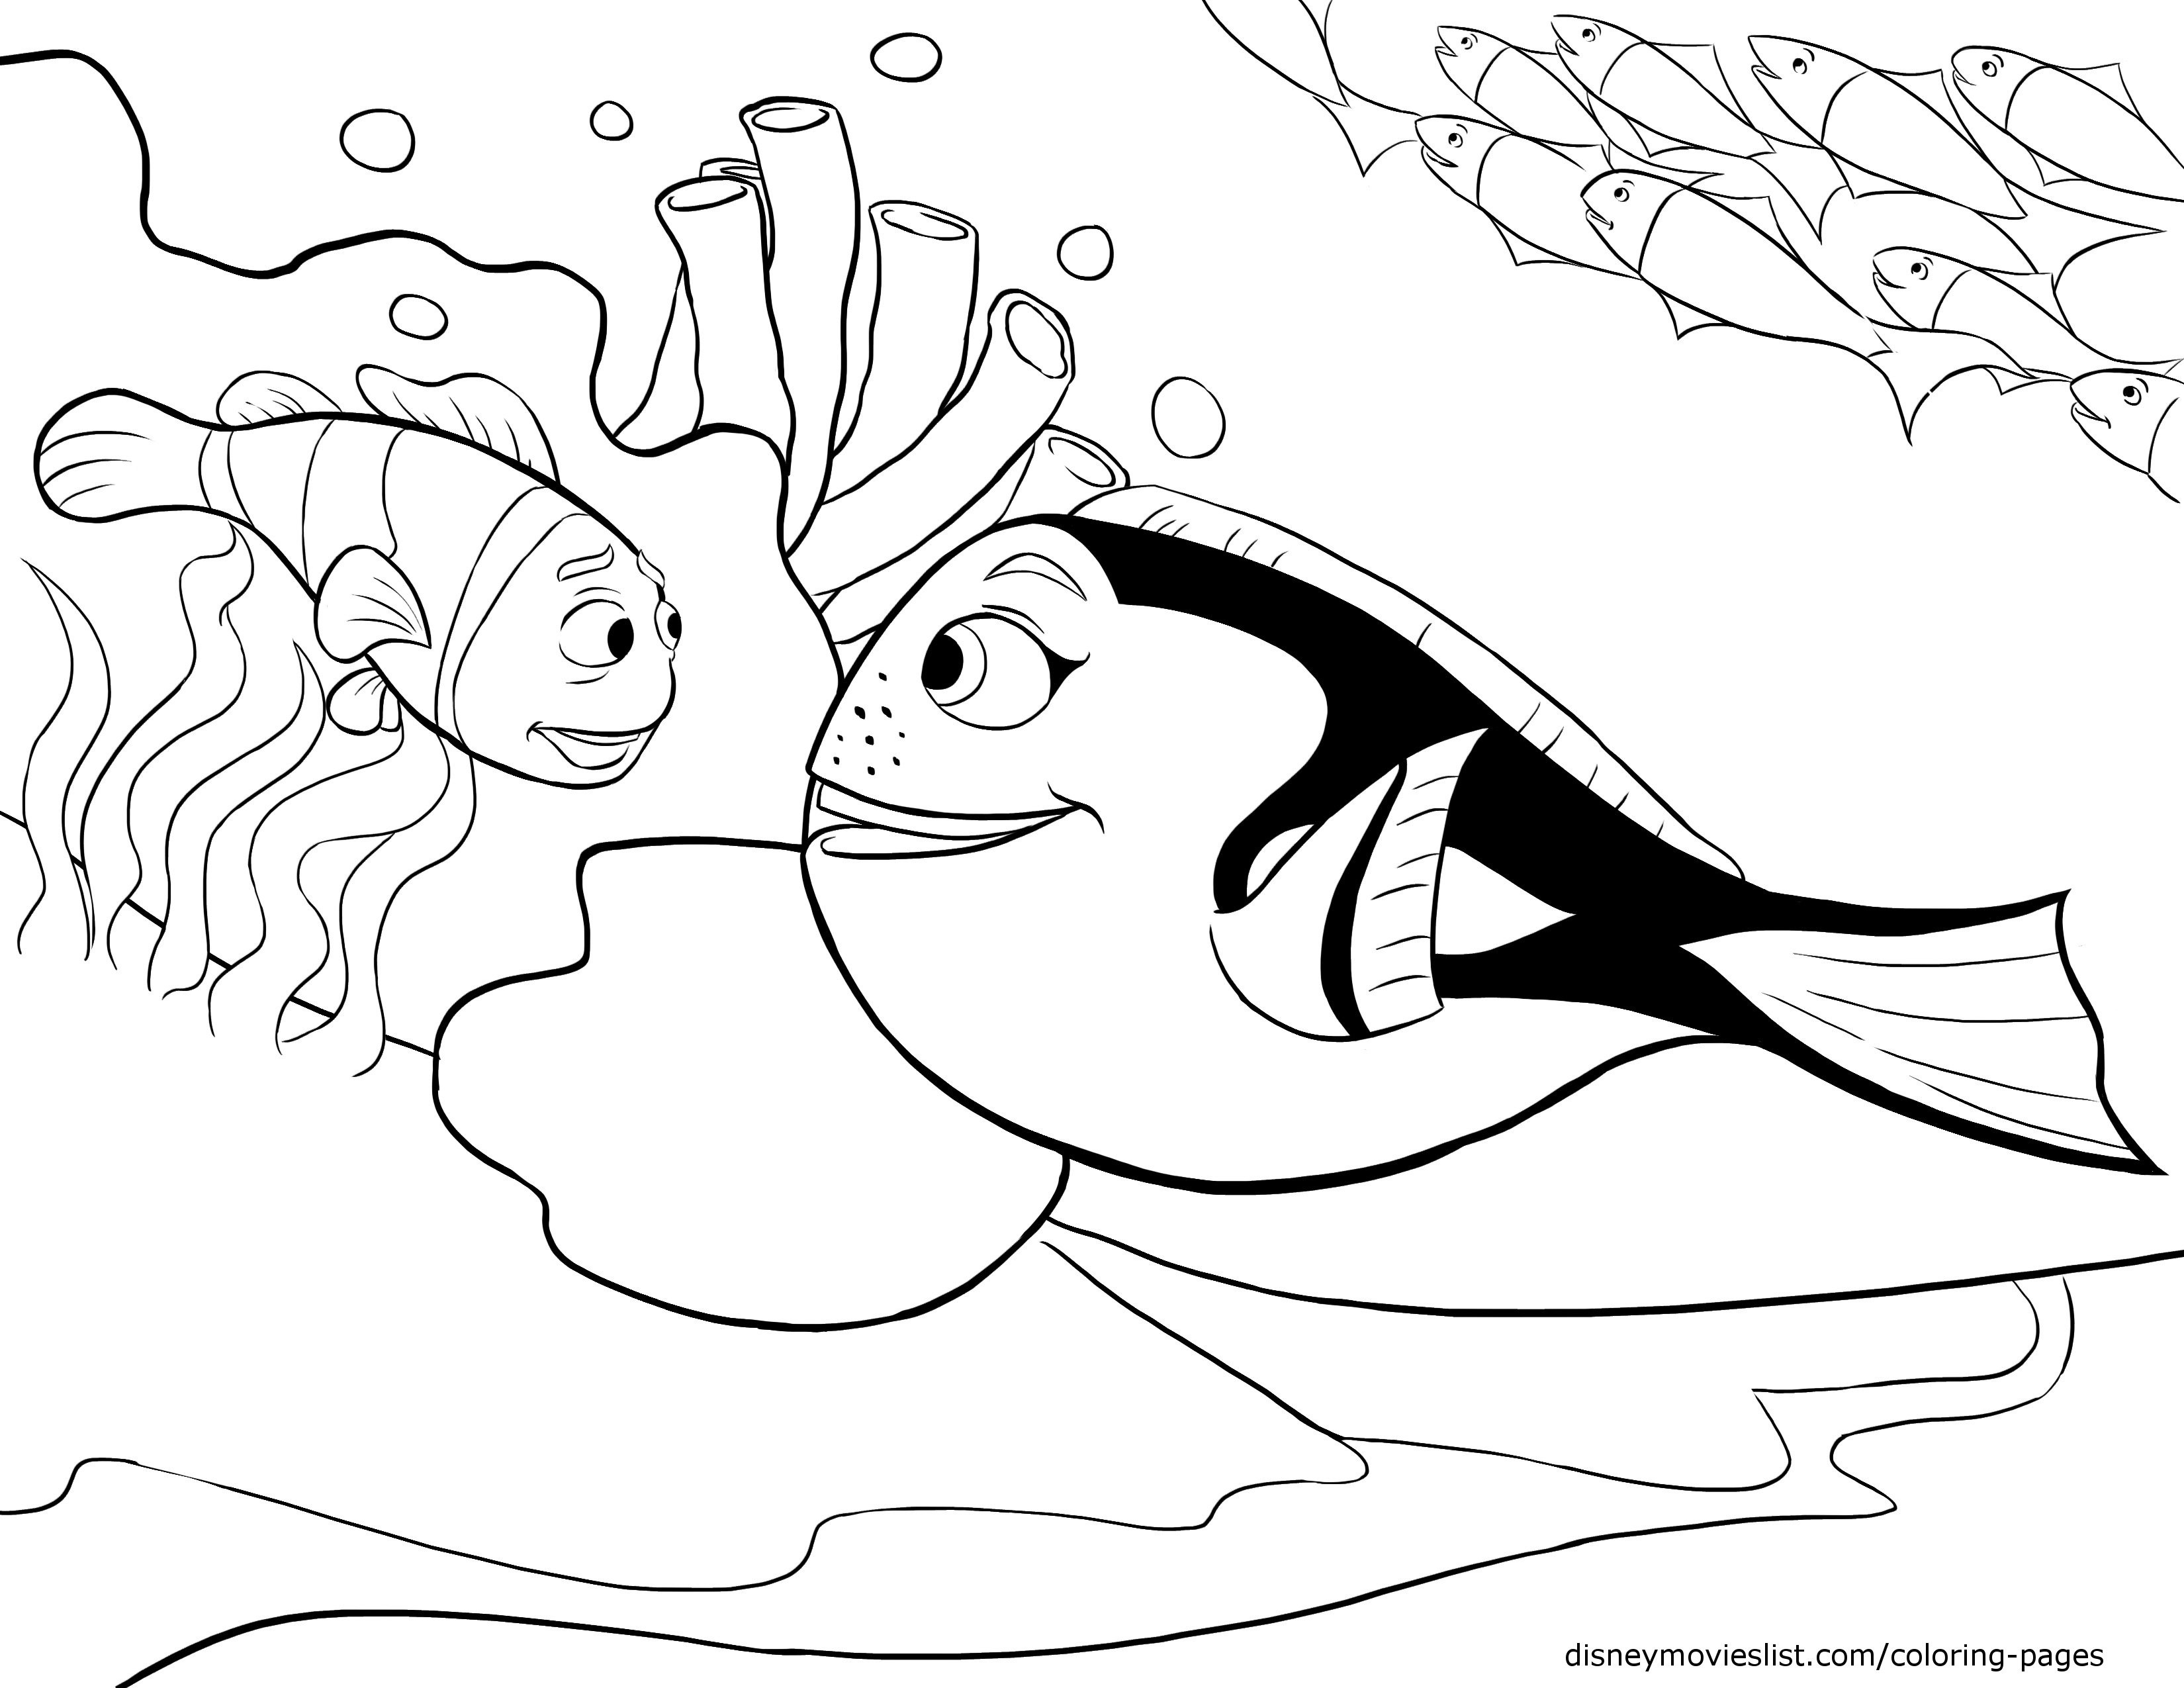 Aquarium Coloring Pages Coloring Pages Coloring Ideas Dory And Nemo Pages Inspirational